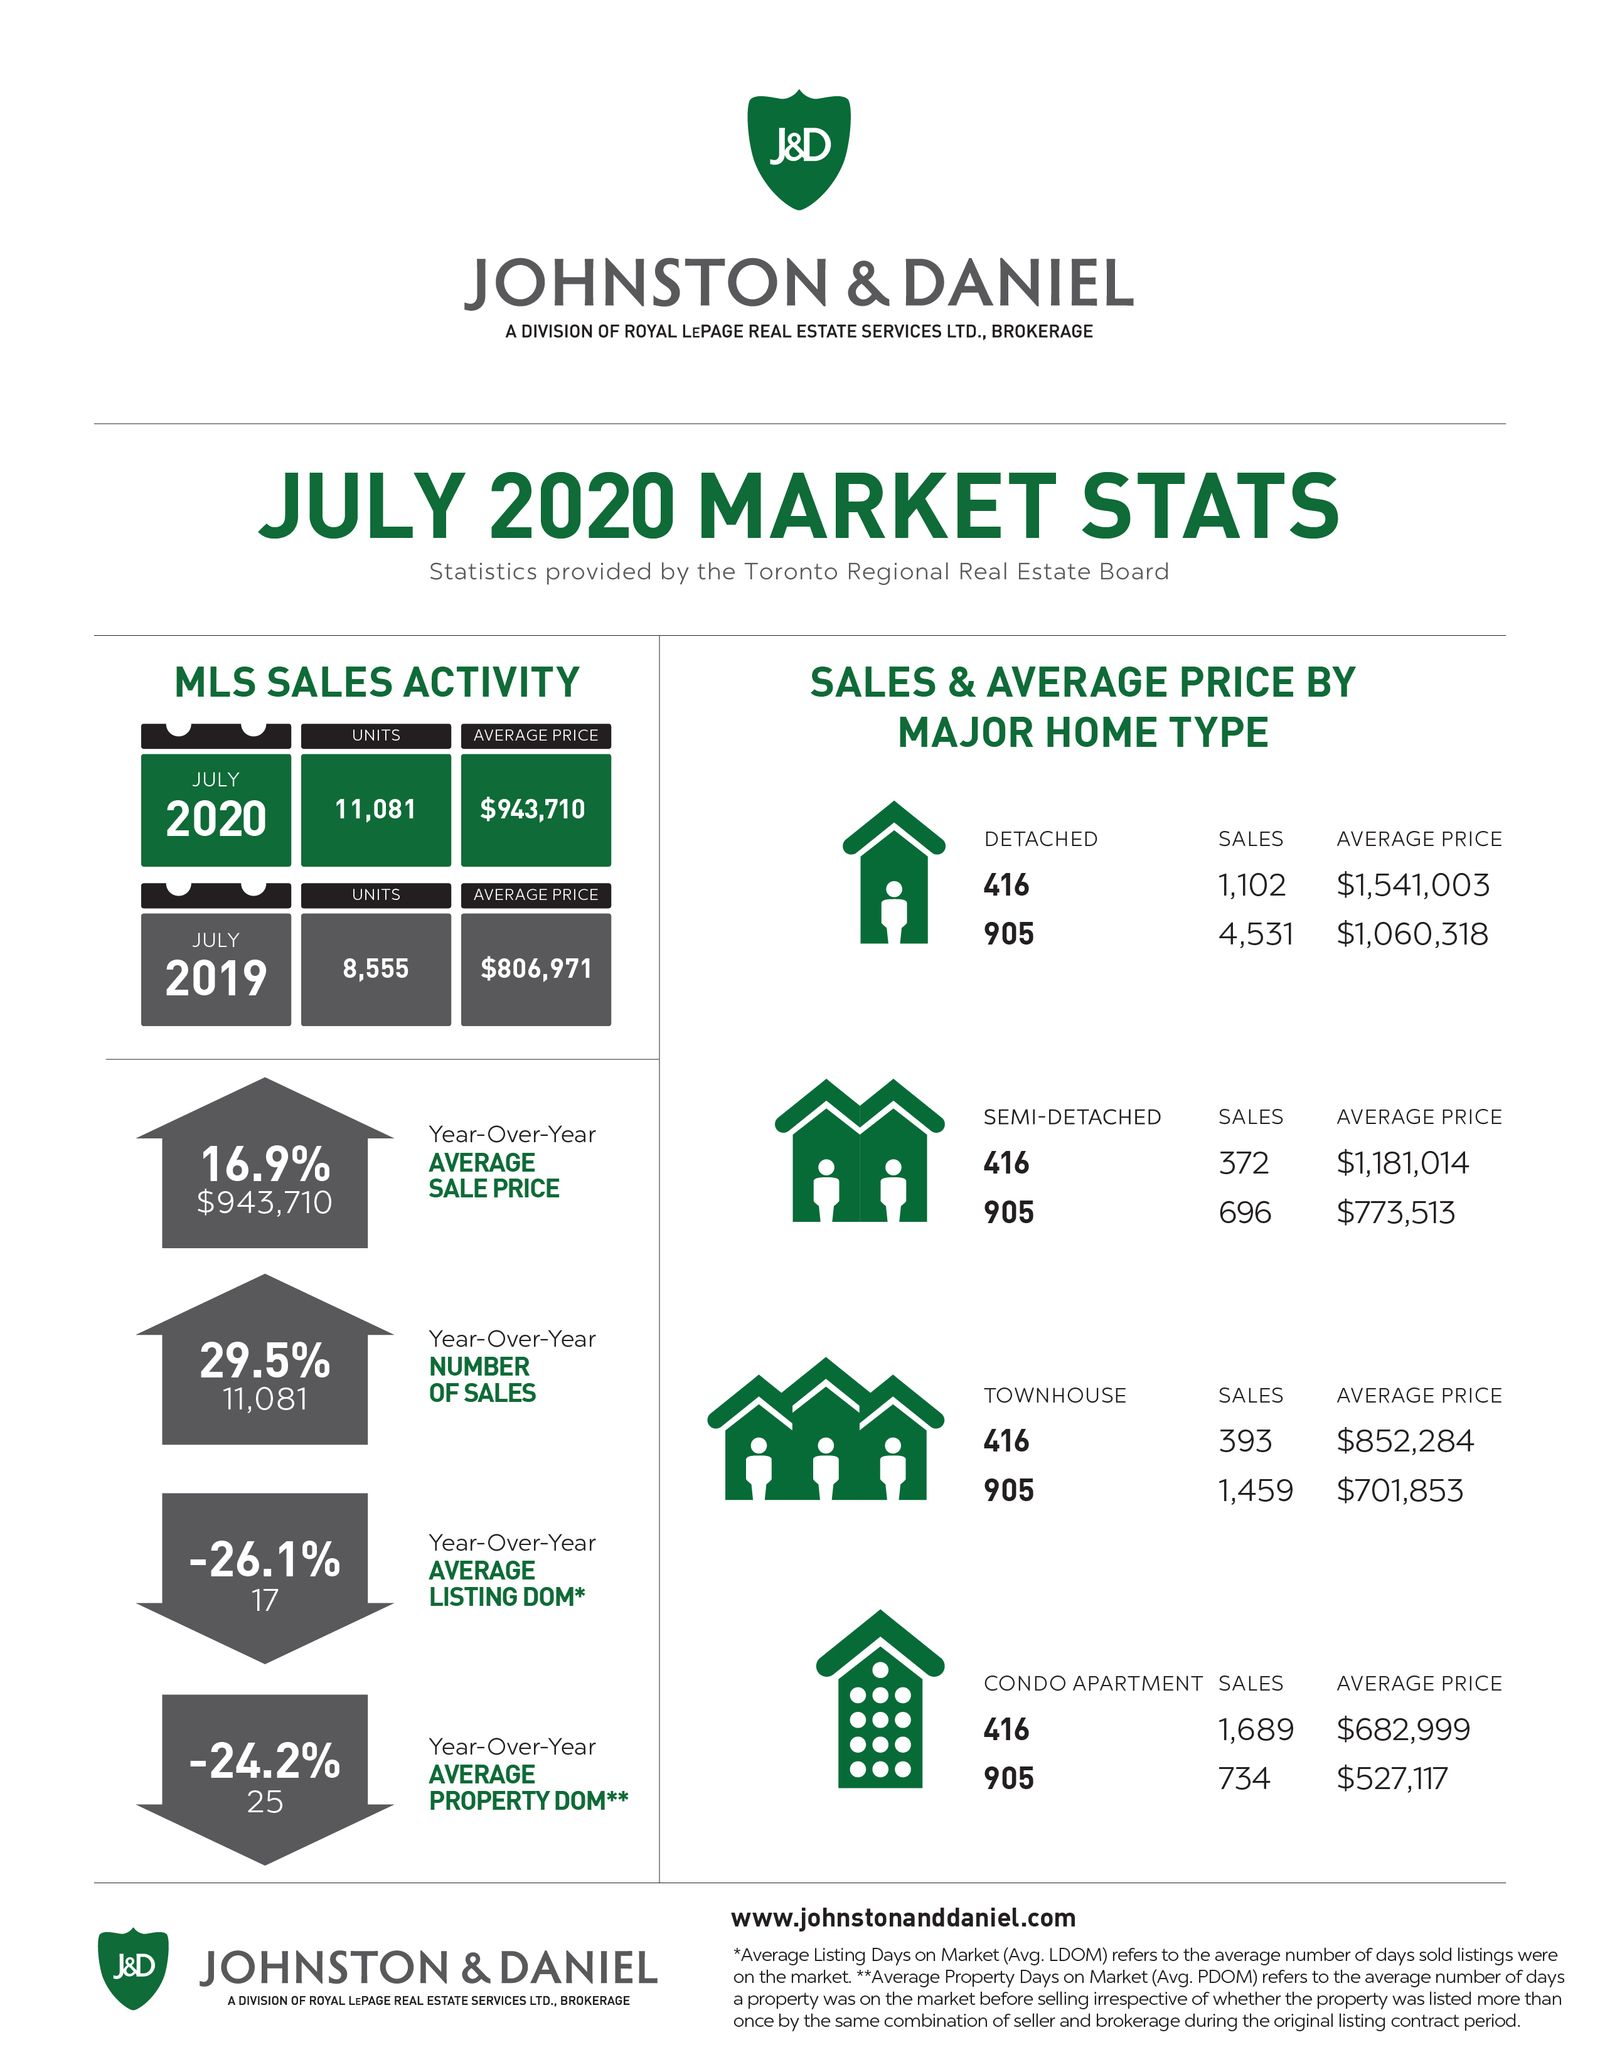 July 2020 Market Stats from the Toronto Regional Real Estate Board